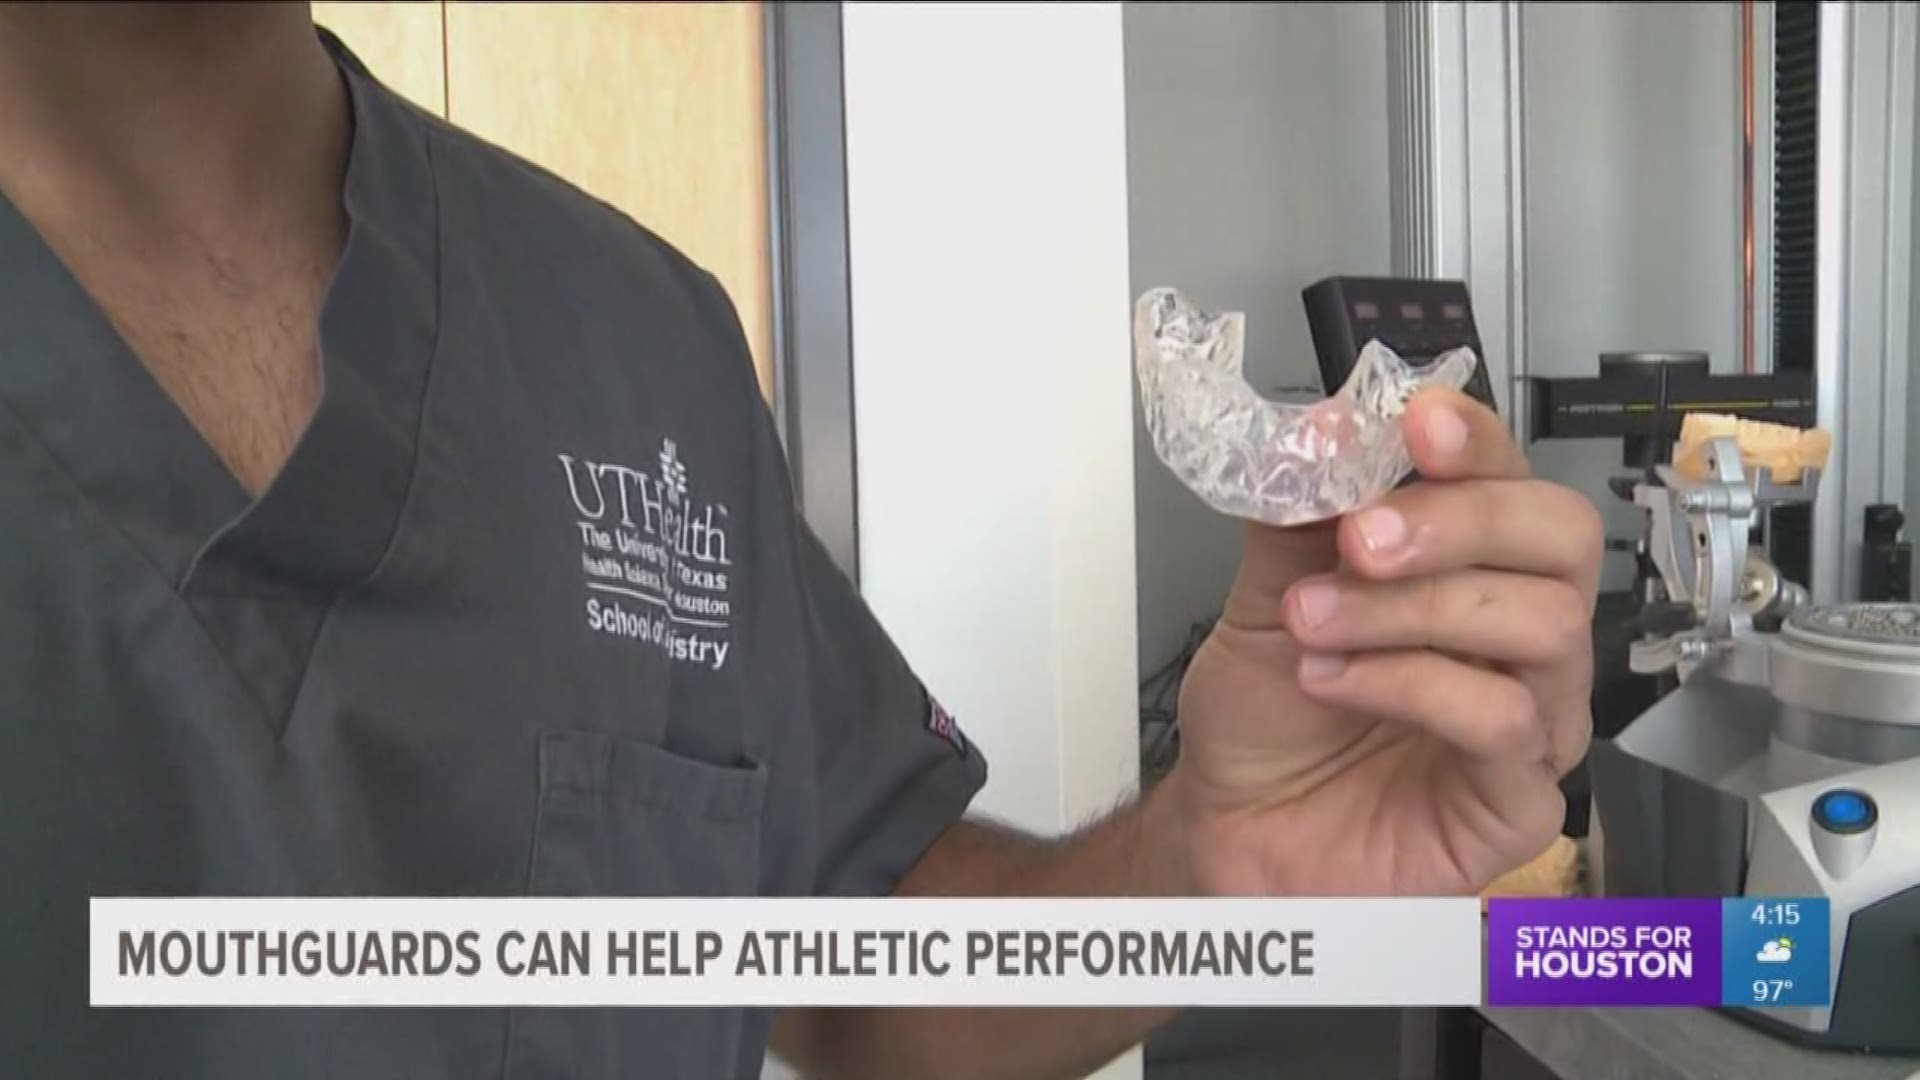 Researchers at UT Health School of Dentistry say mouthguards not only protect teeth, but also improve athletic performance.